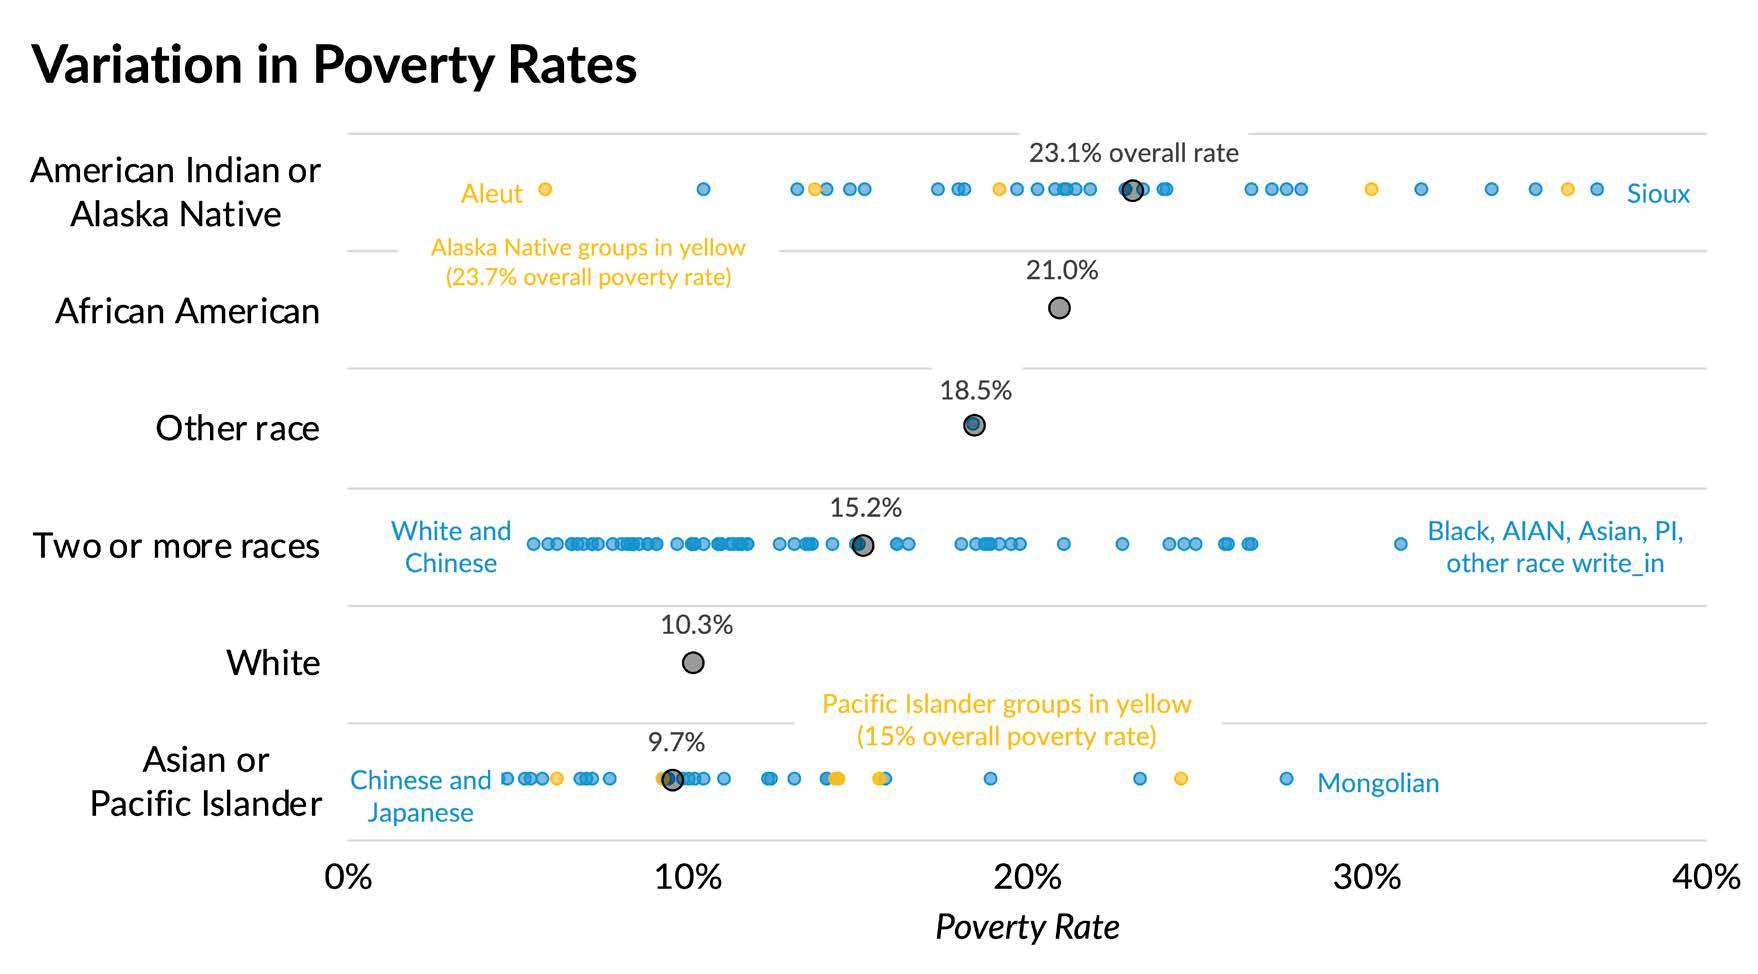 Graph showing variation in poverty rates by race (American Indian/Native Alaskan, African American, White, Asian/Pacific Islander, and other) and poverty rate (0% to 40%)